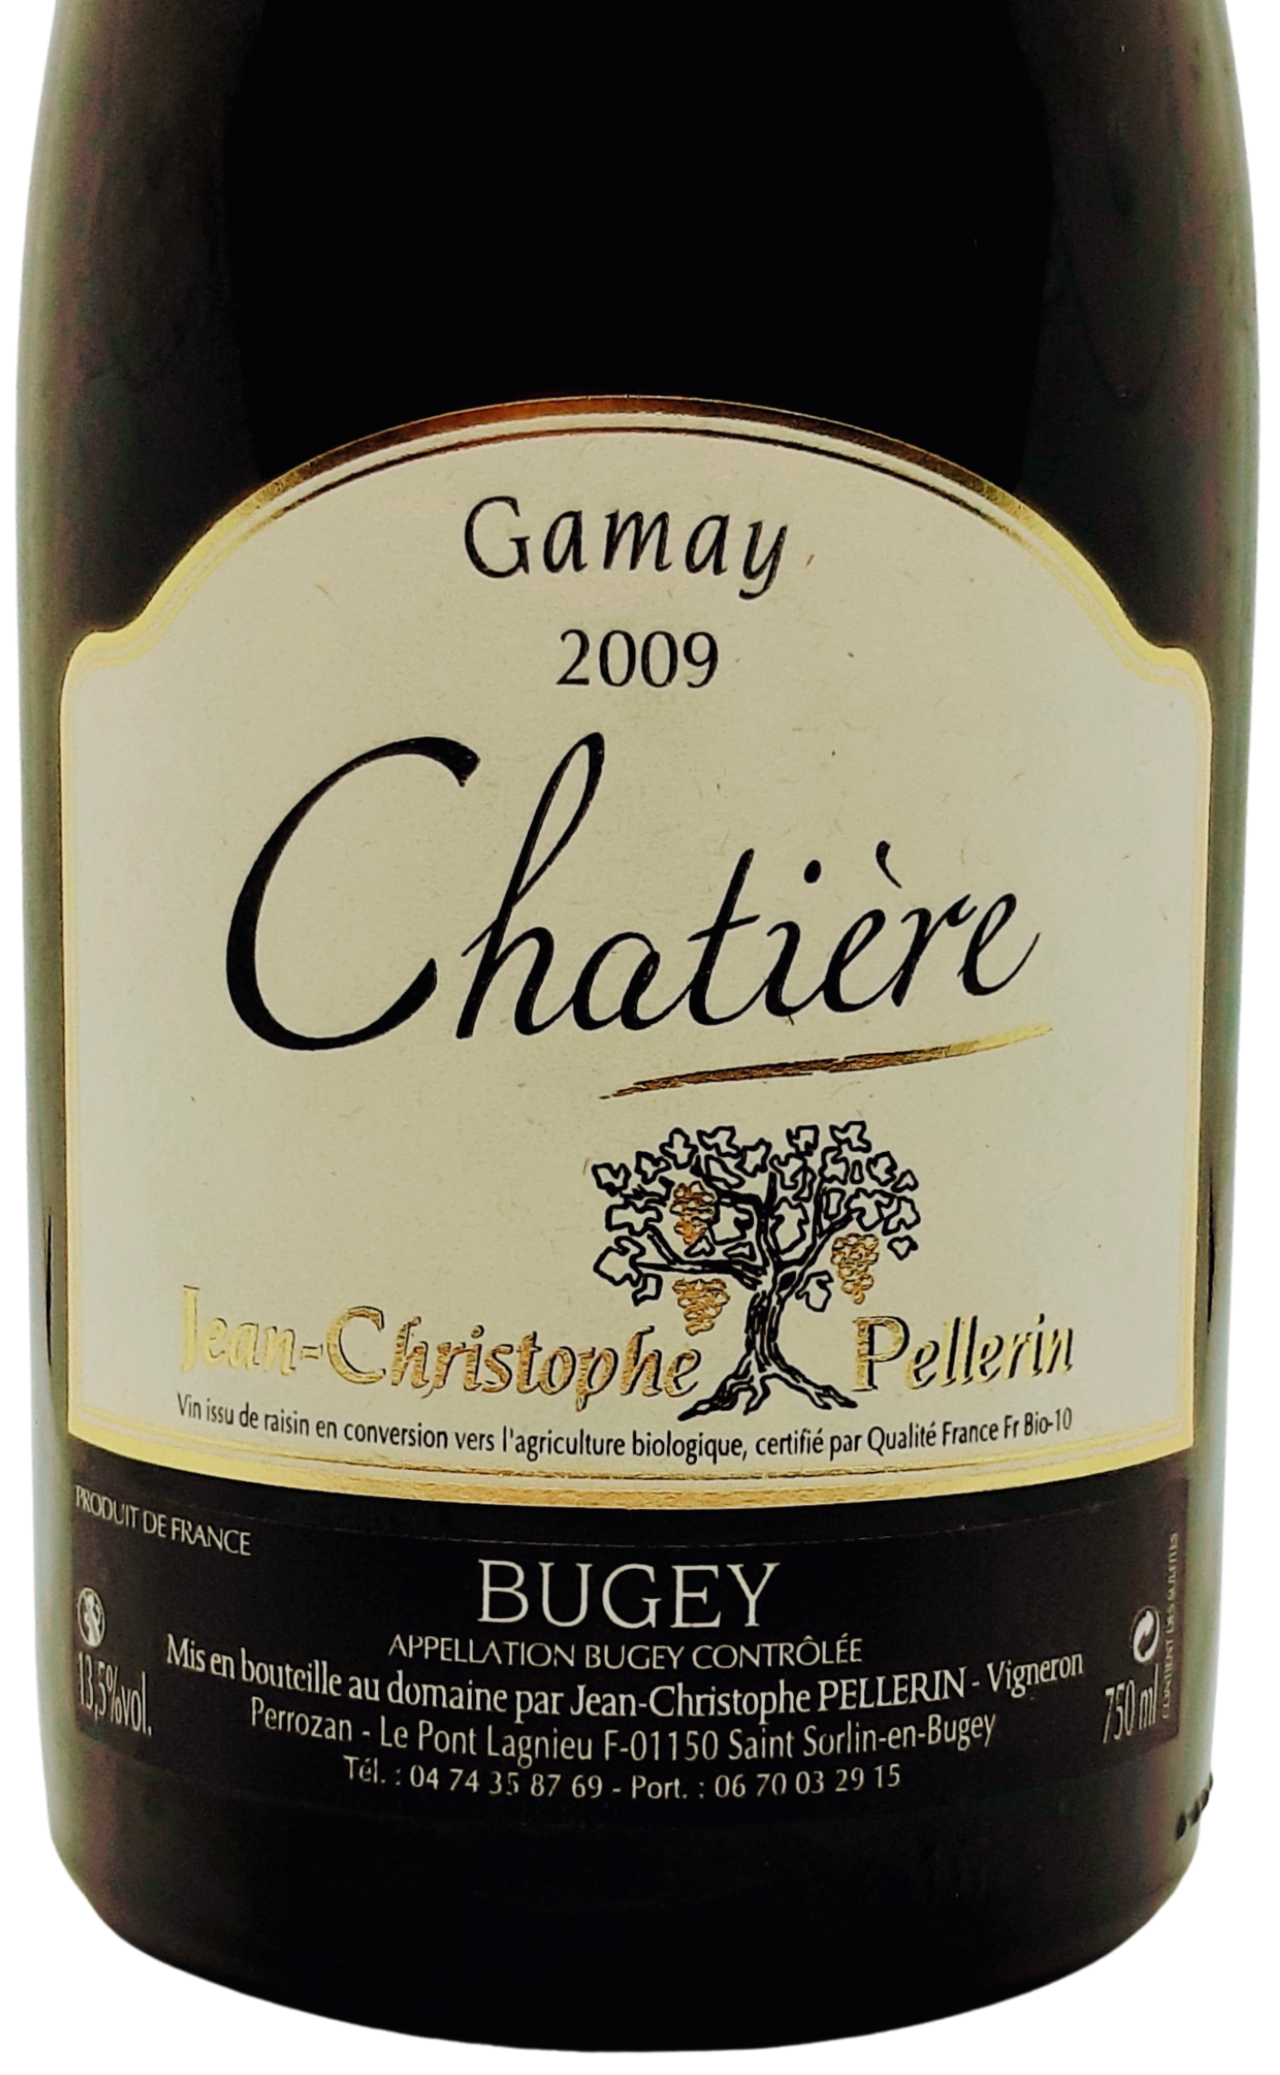 Chatière Bugey Gamay